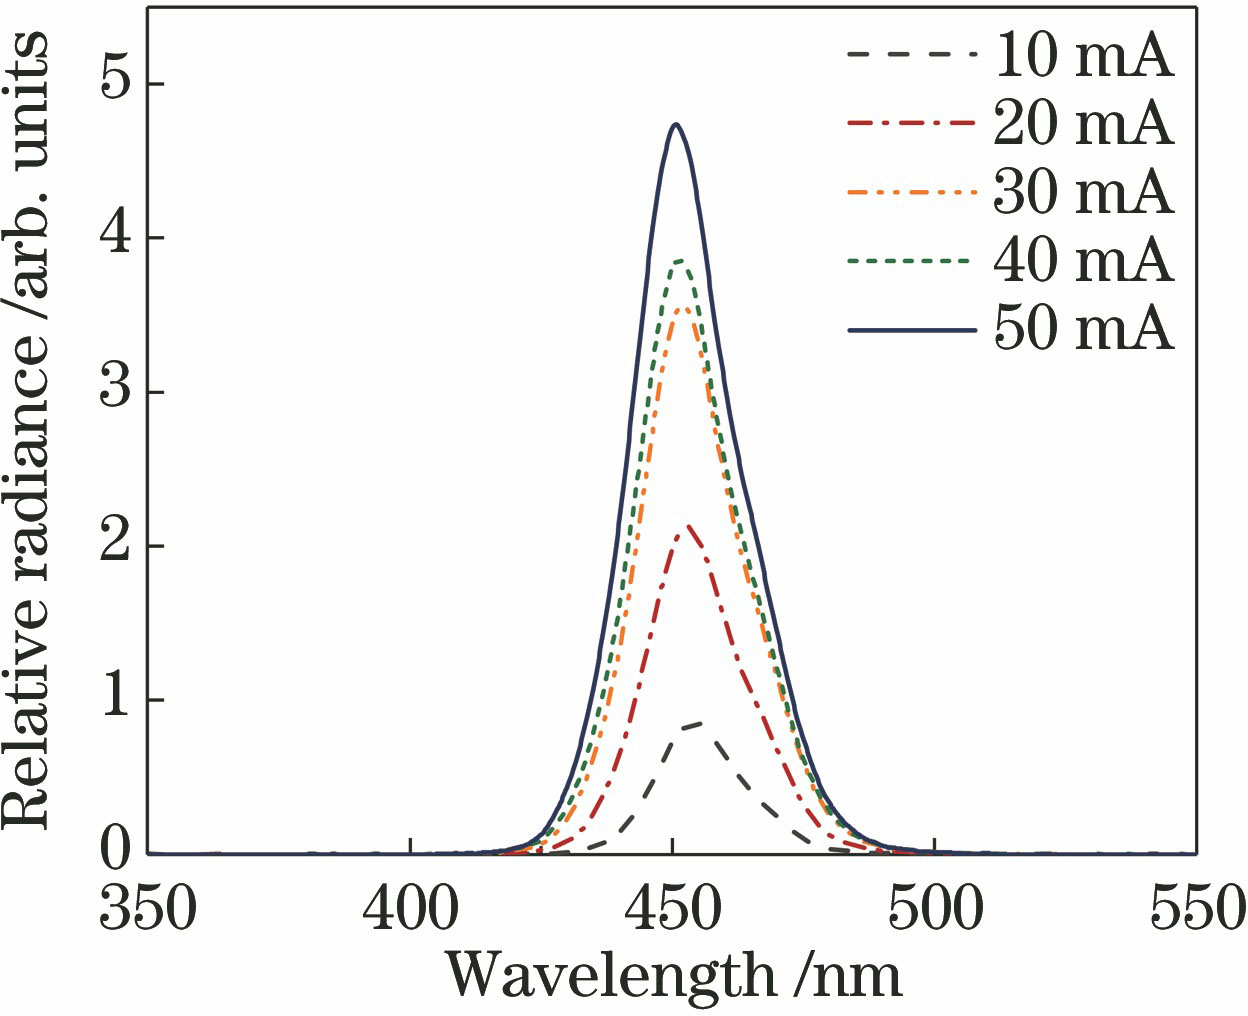 Experimental results of spectral irradiance as a function of drive current